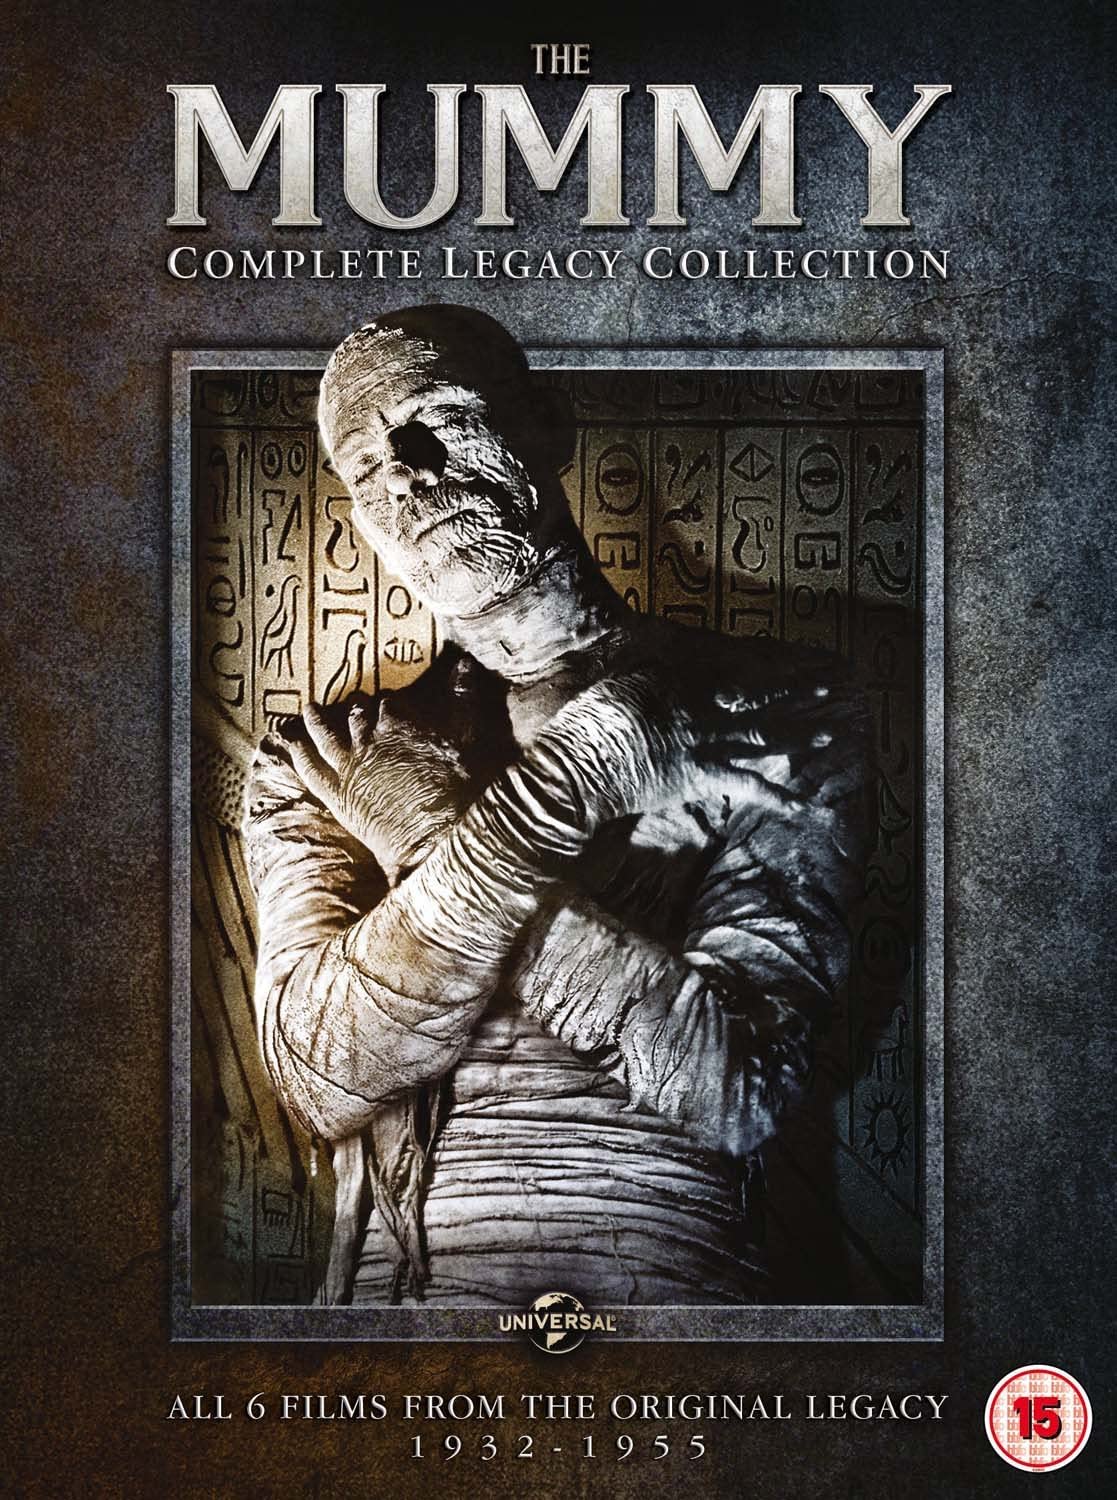 The Mummy: Complete Legacy Collection (DVD)